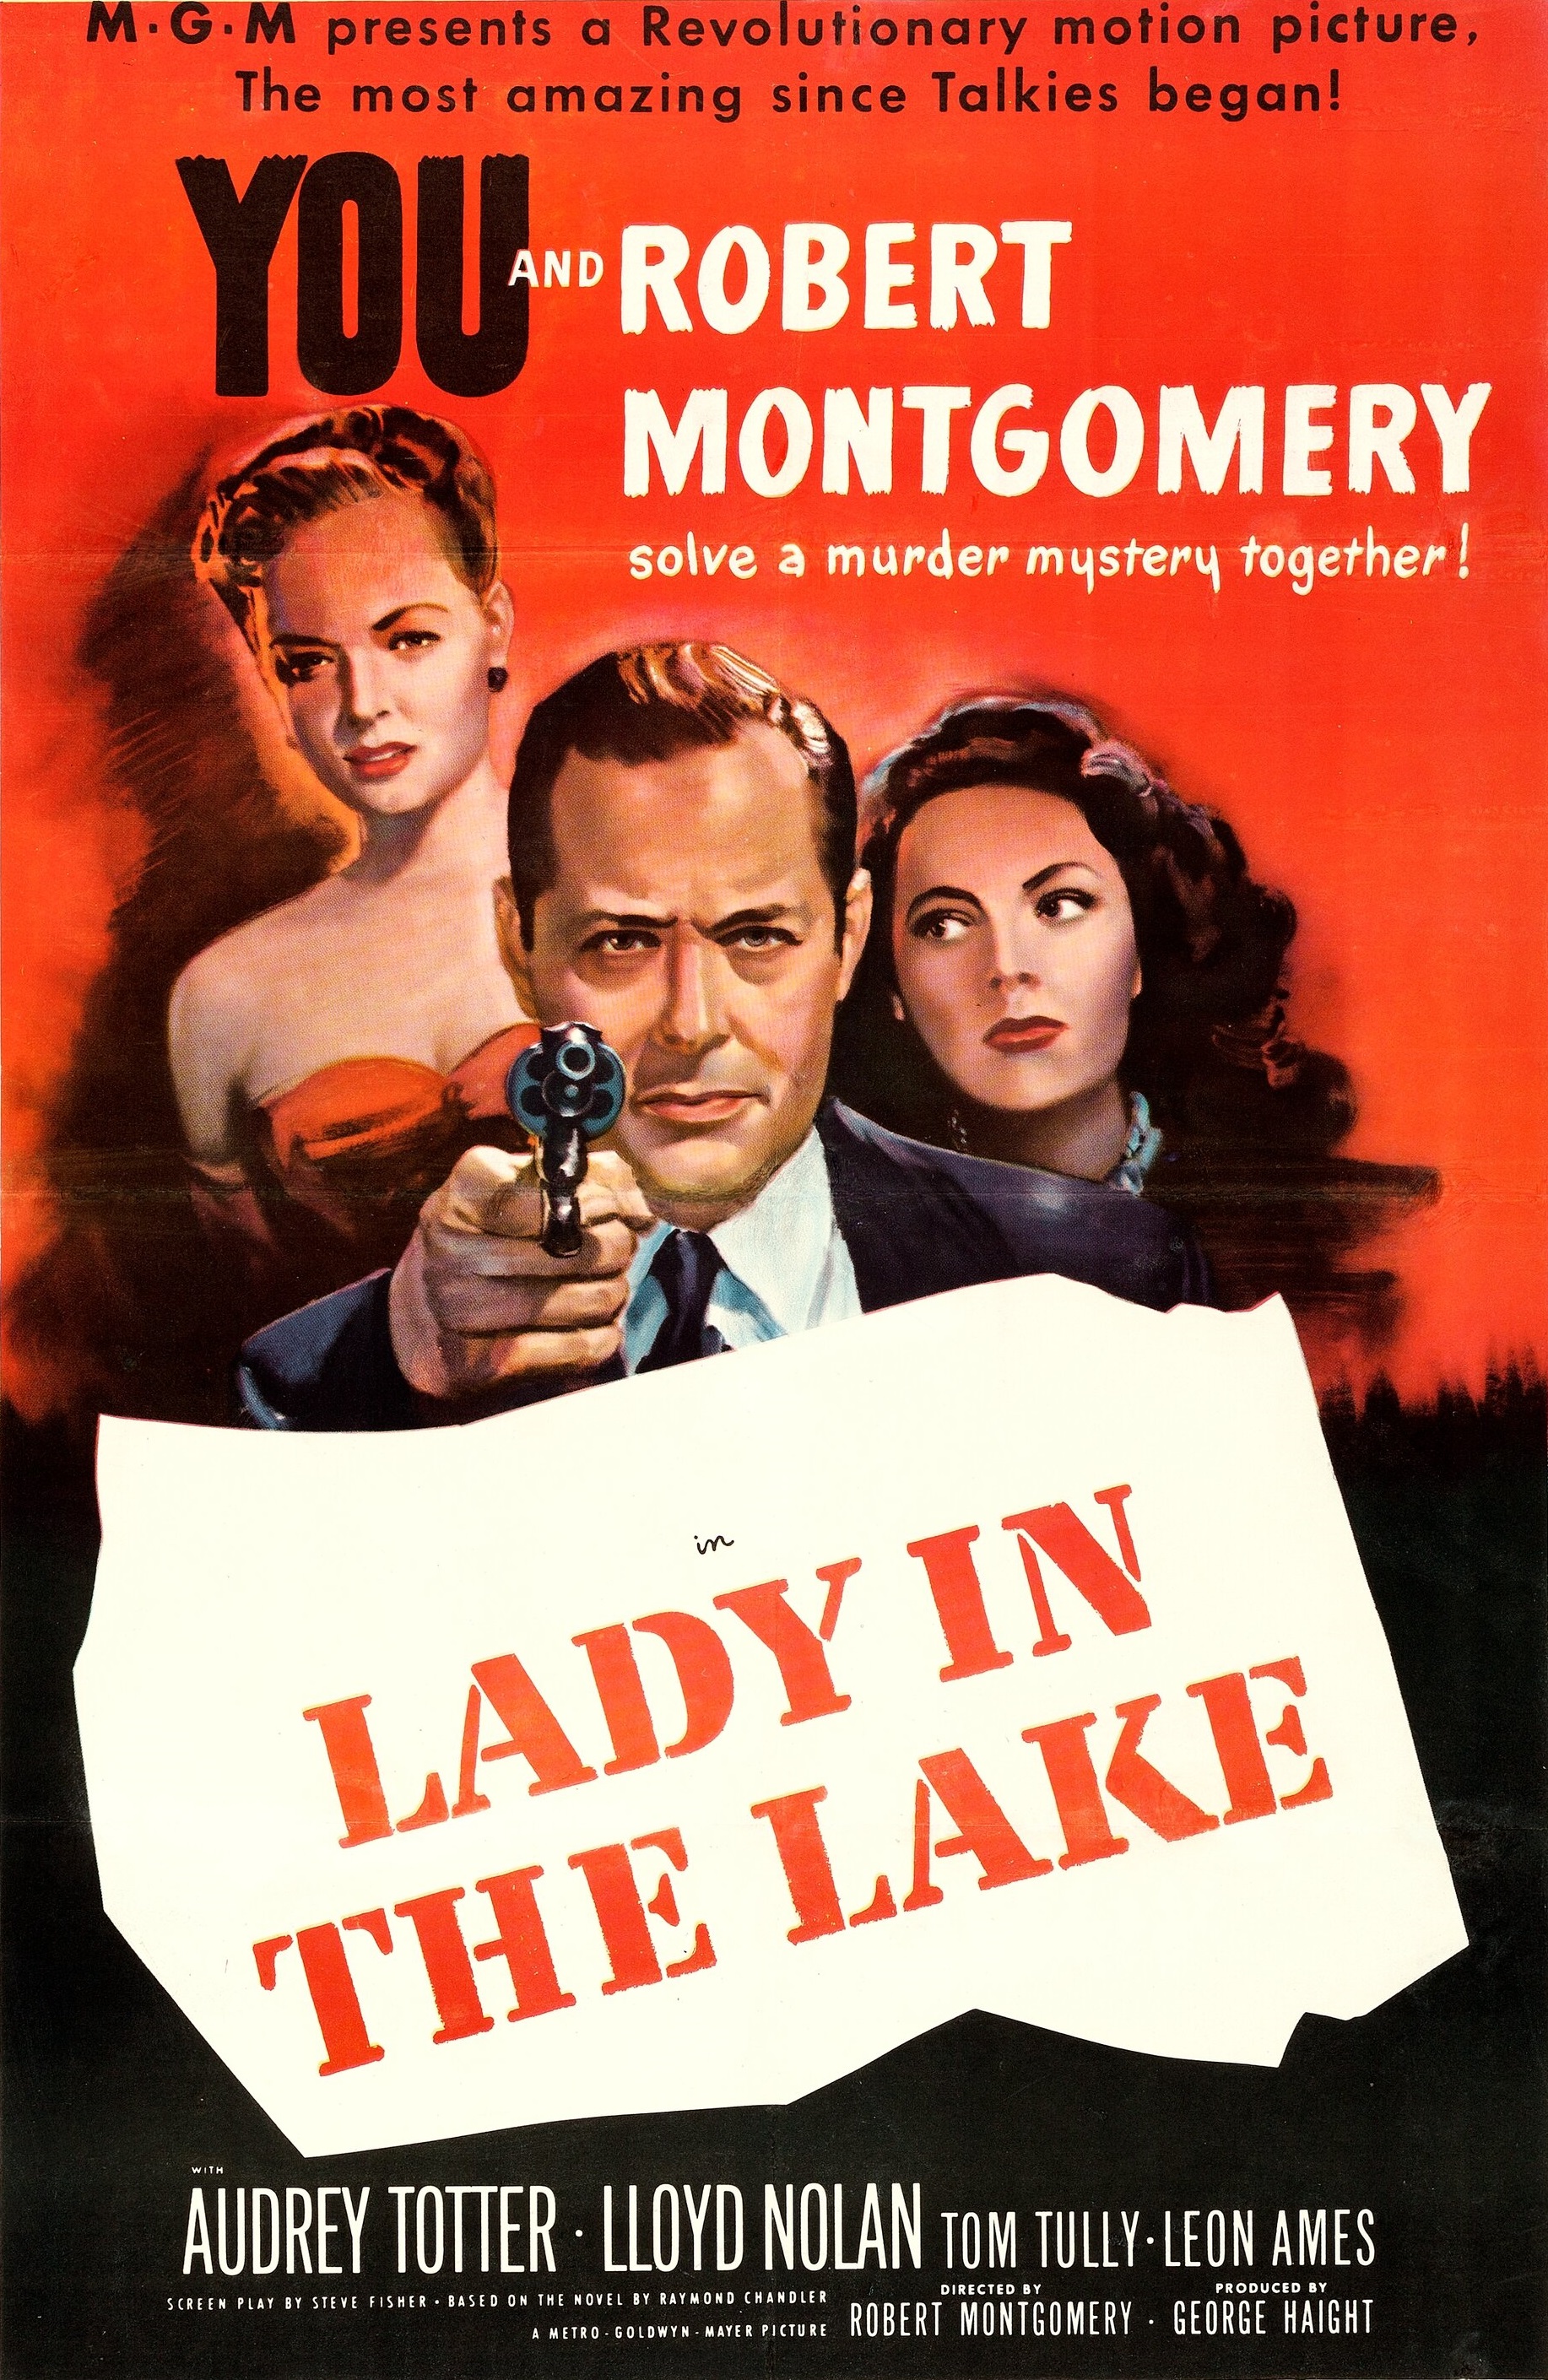 LADY IN THE LAKE (1947)